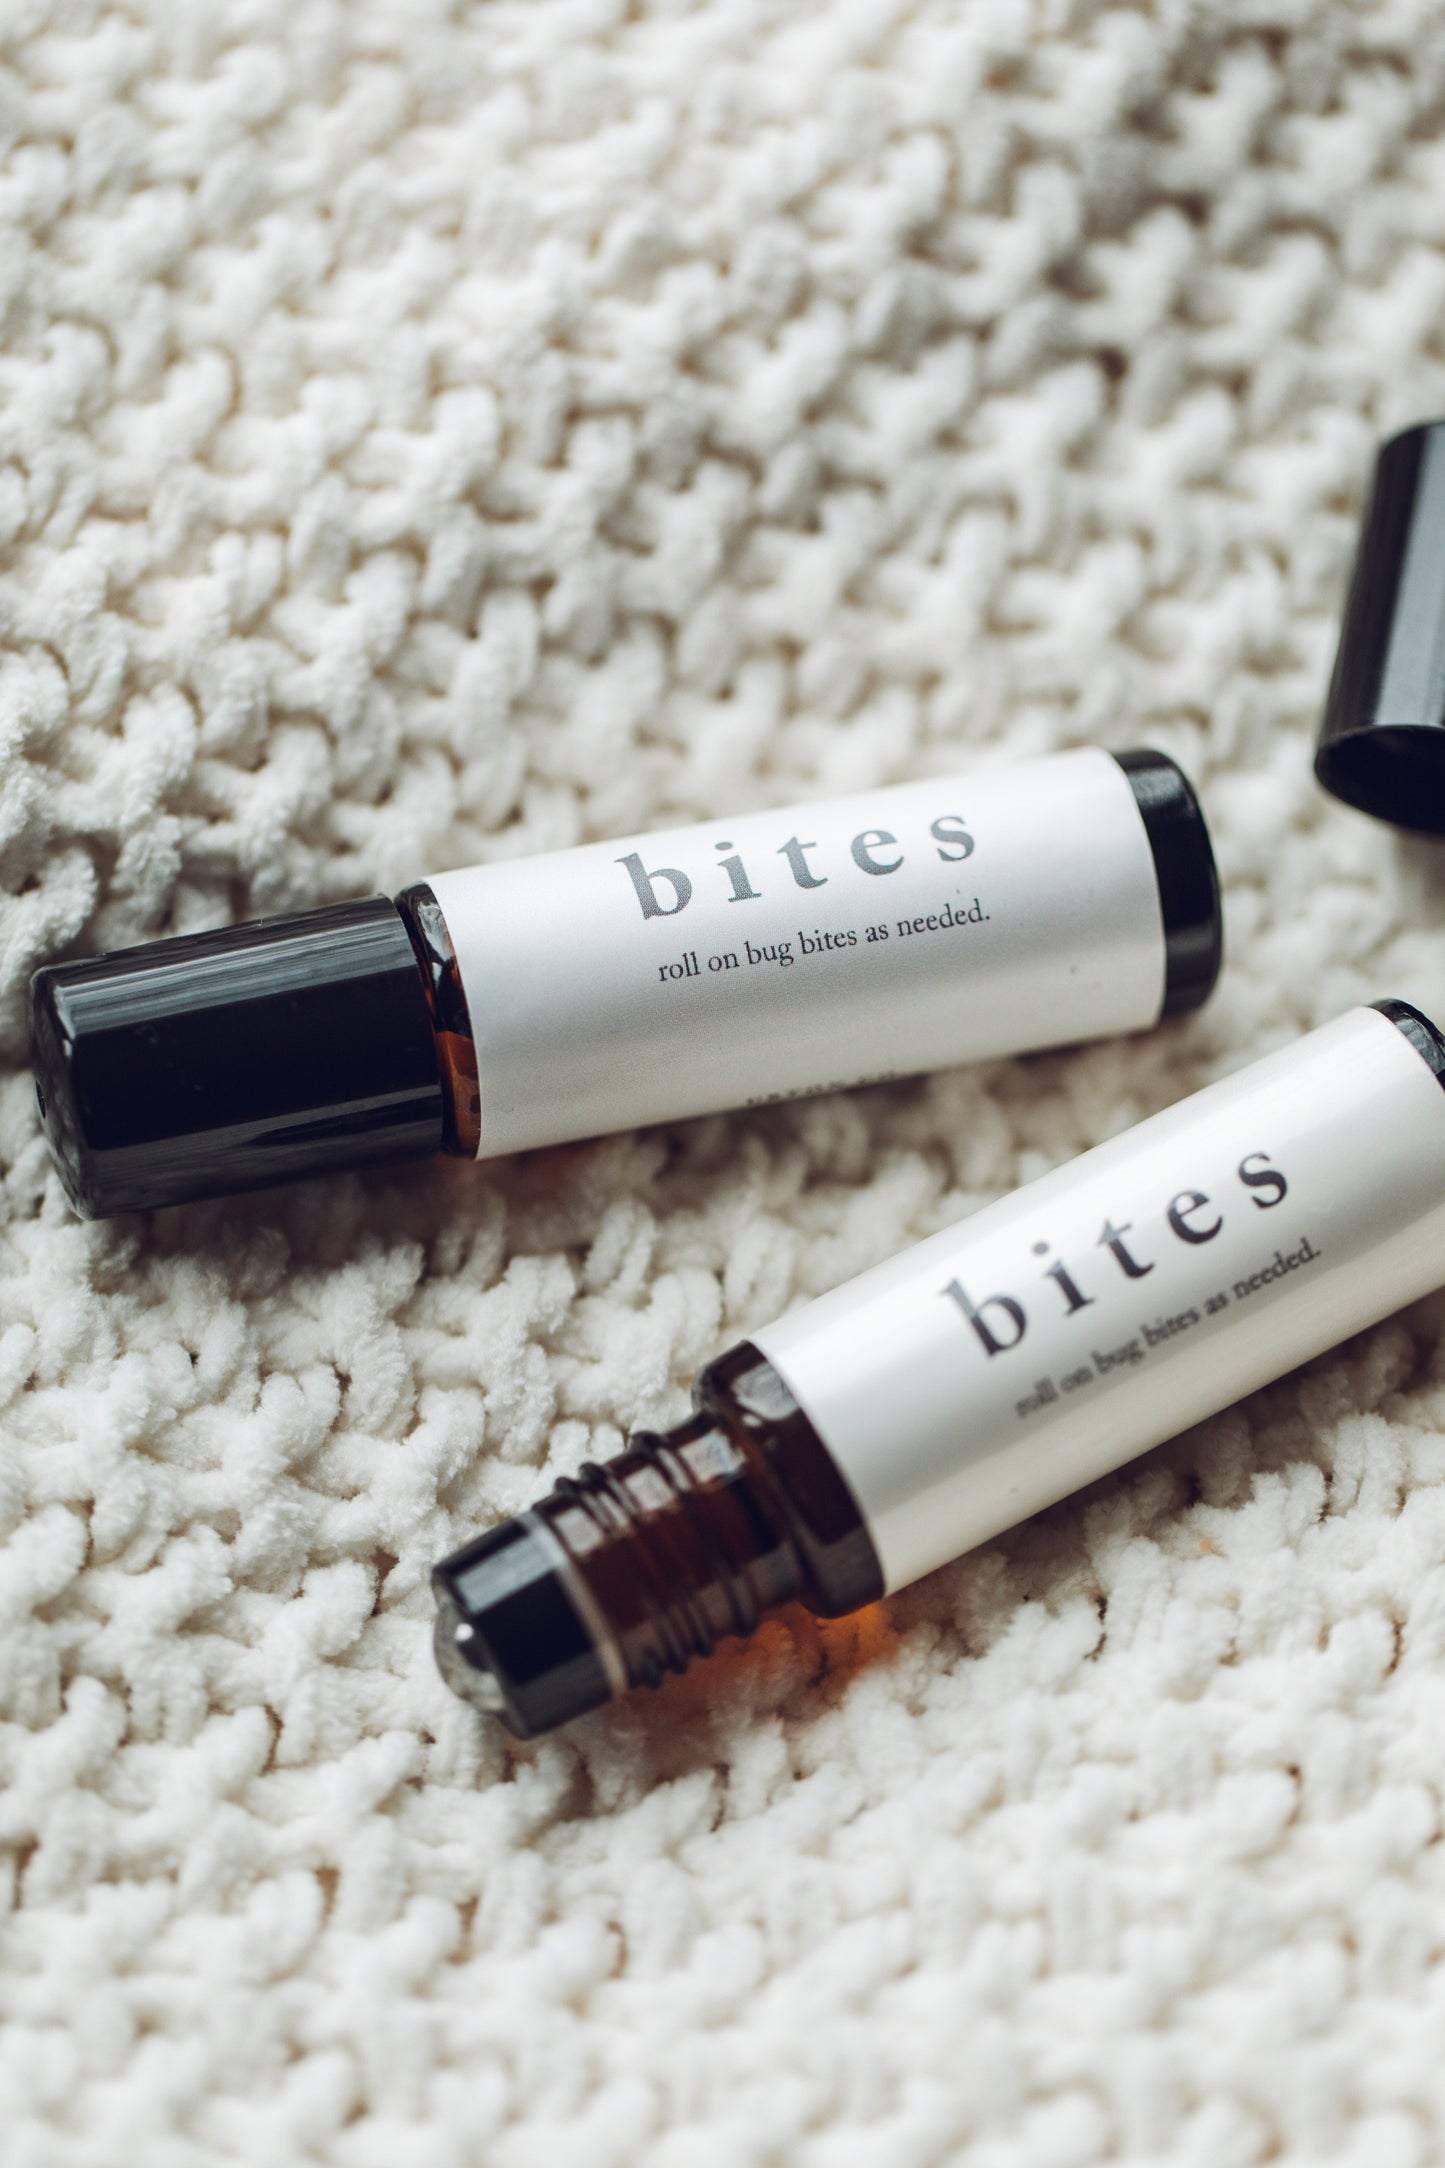 Bug Bite Relief Roll On. Natural Remedy Bug Bites, Mosquito Bites + Stings. Natural Itch Relief Essential Oil Blend. Herbal Itch Stick Oil